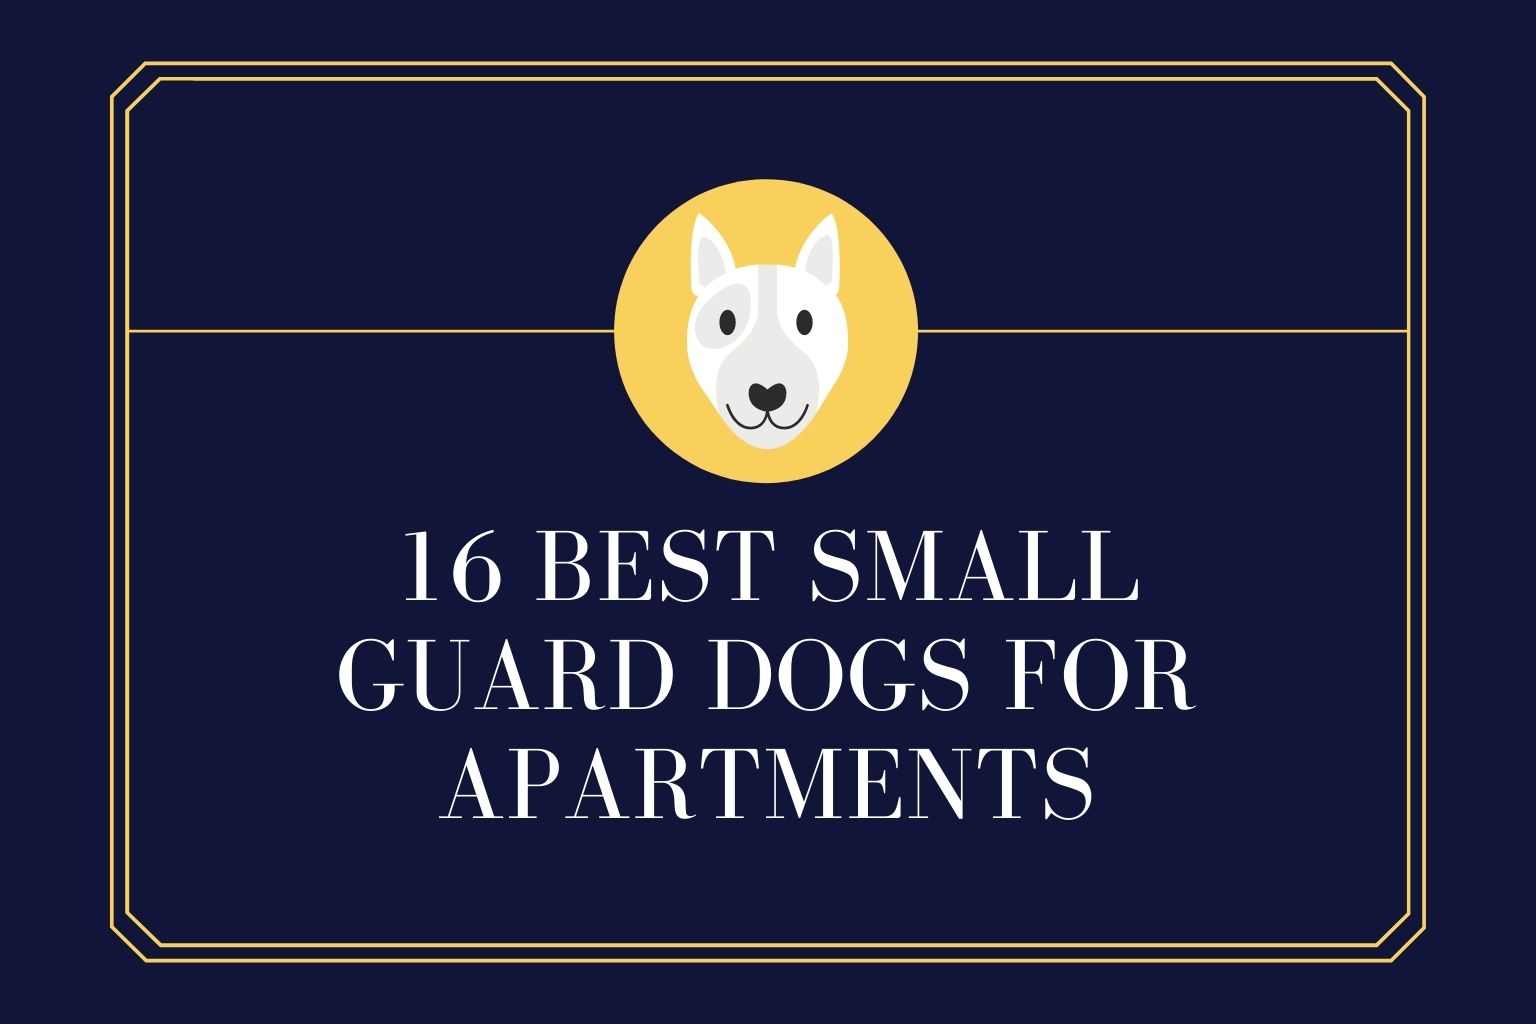 16 Best Small Guard Dogs for Apartments